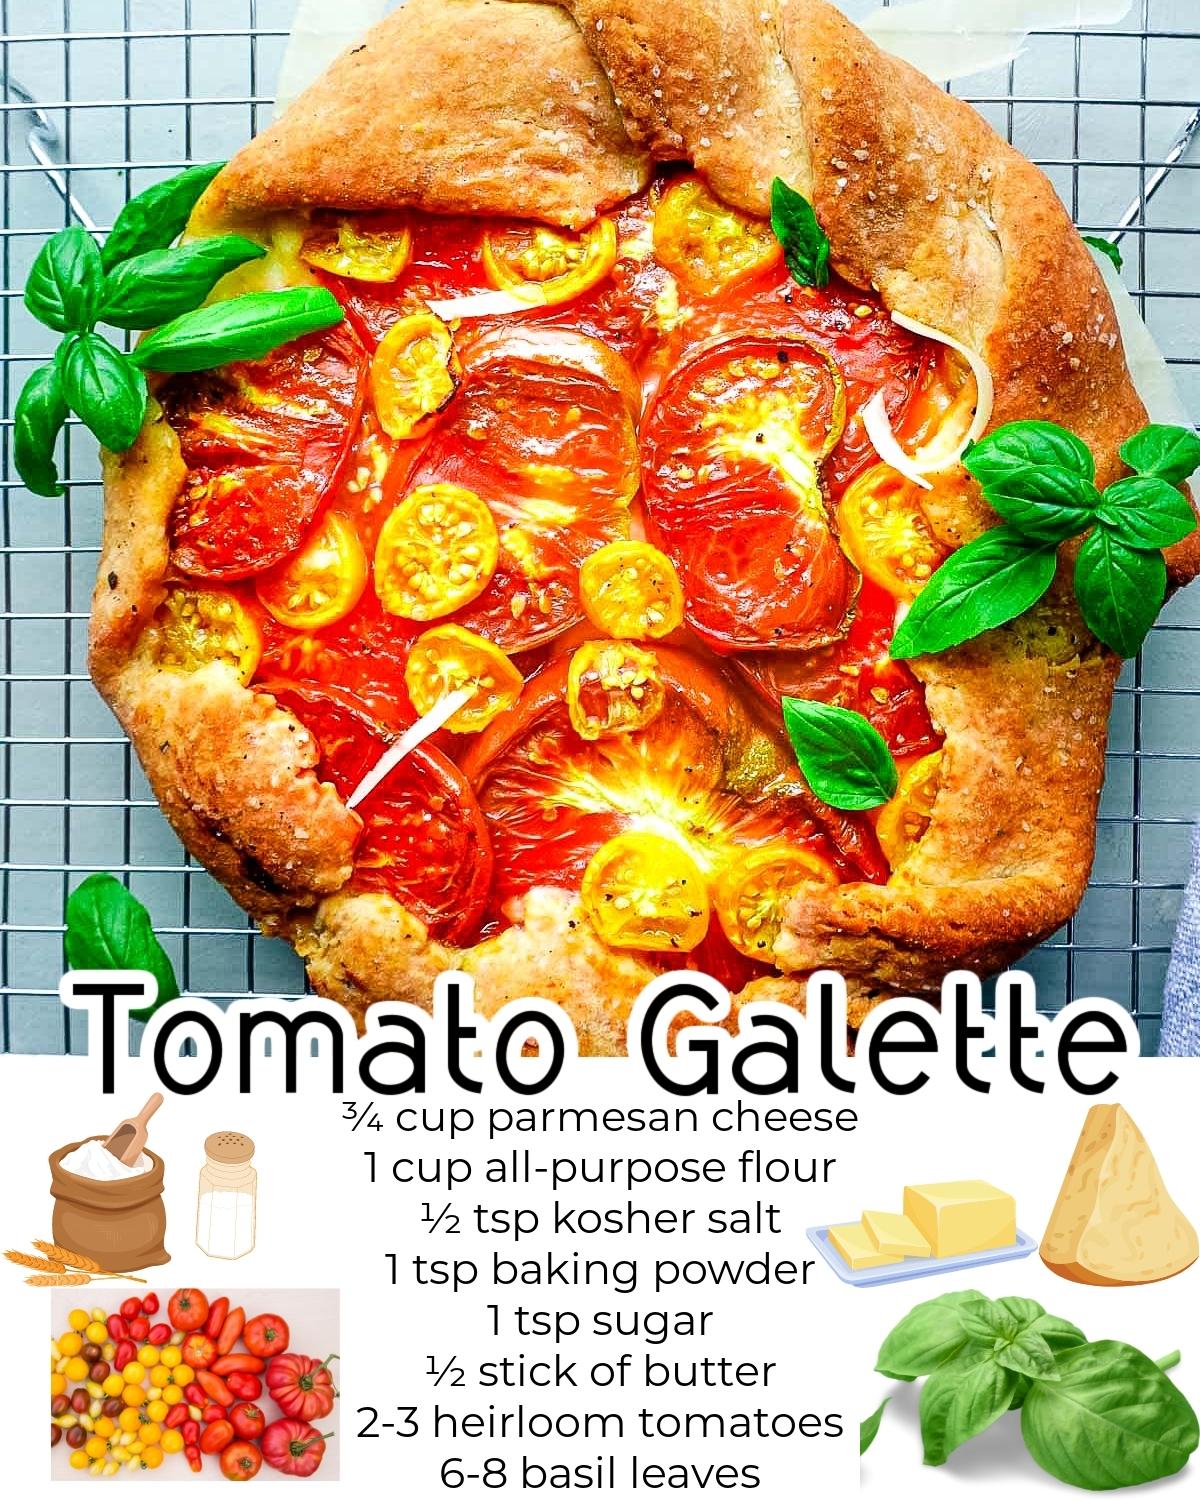 All of the ingredients needed to make Tomato Galette.